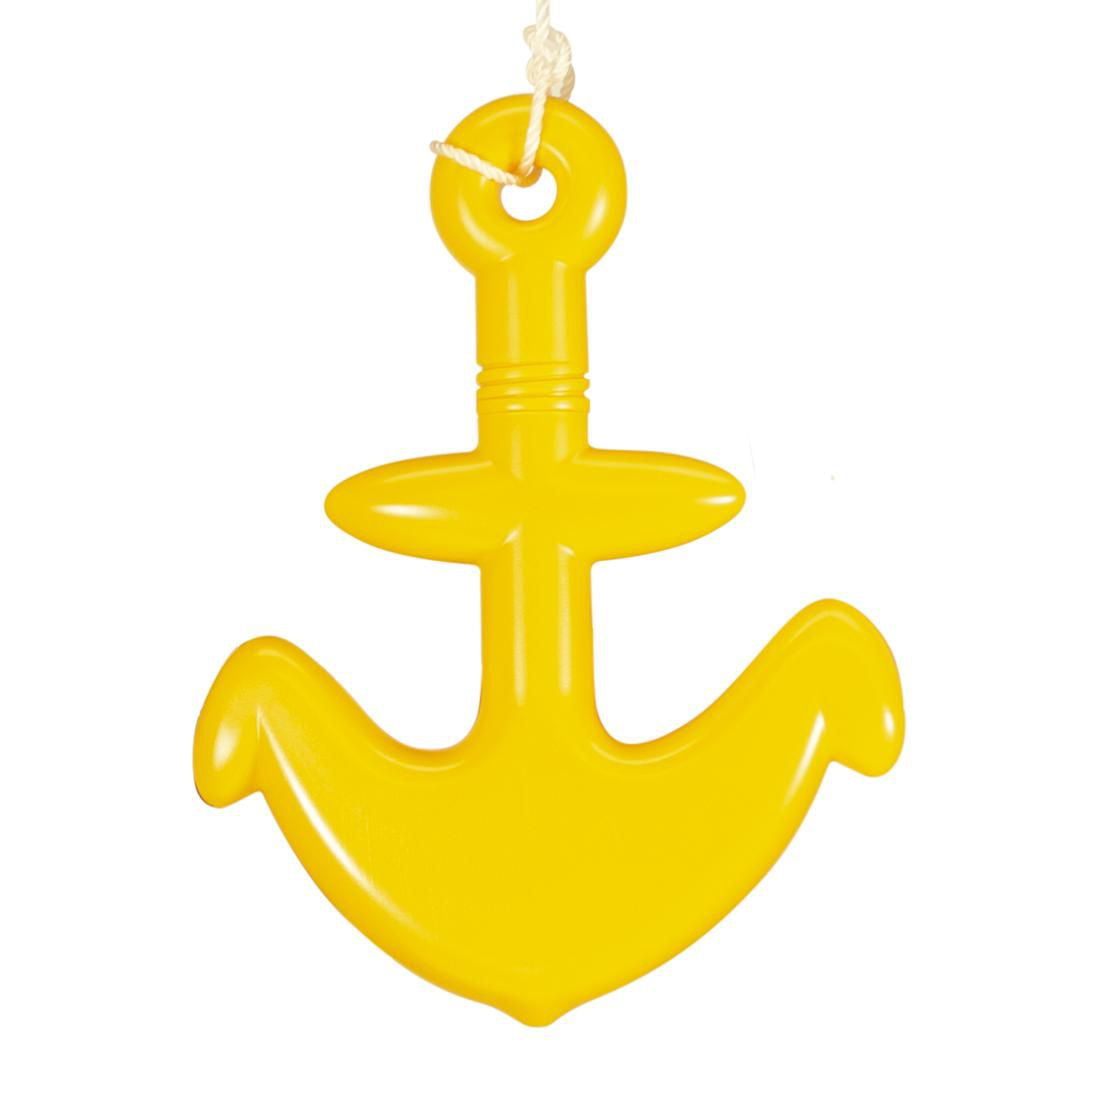  Anchors For Raft